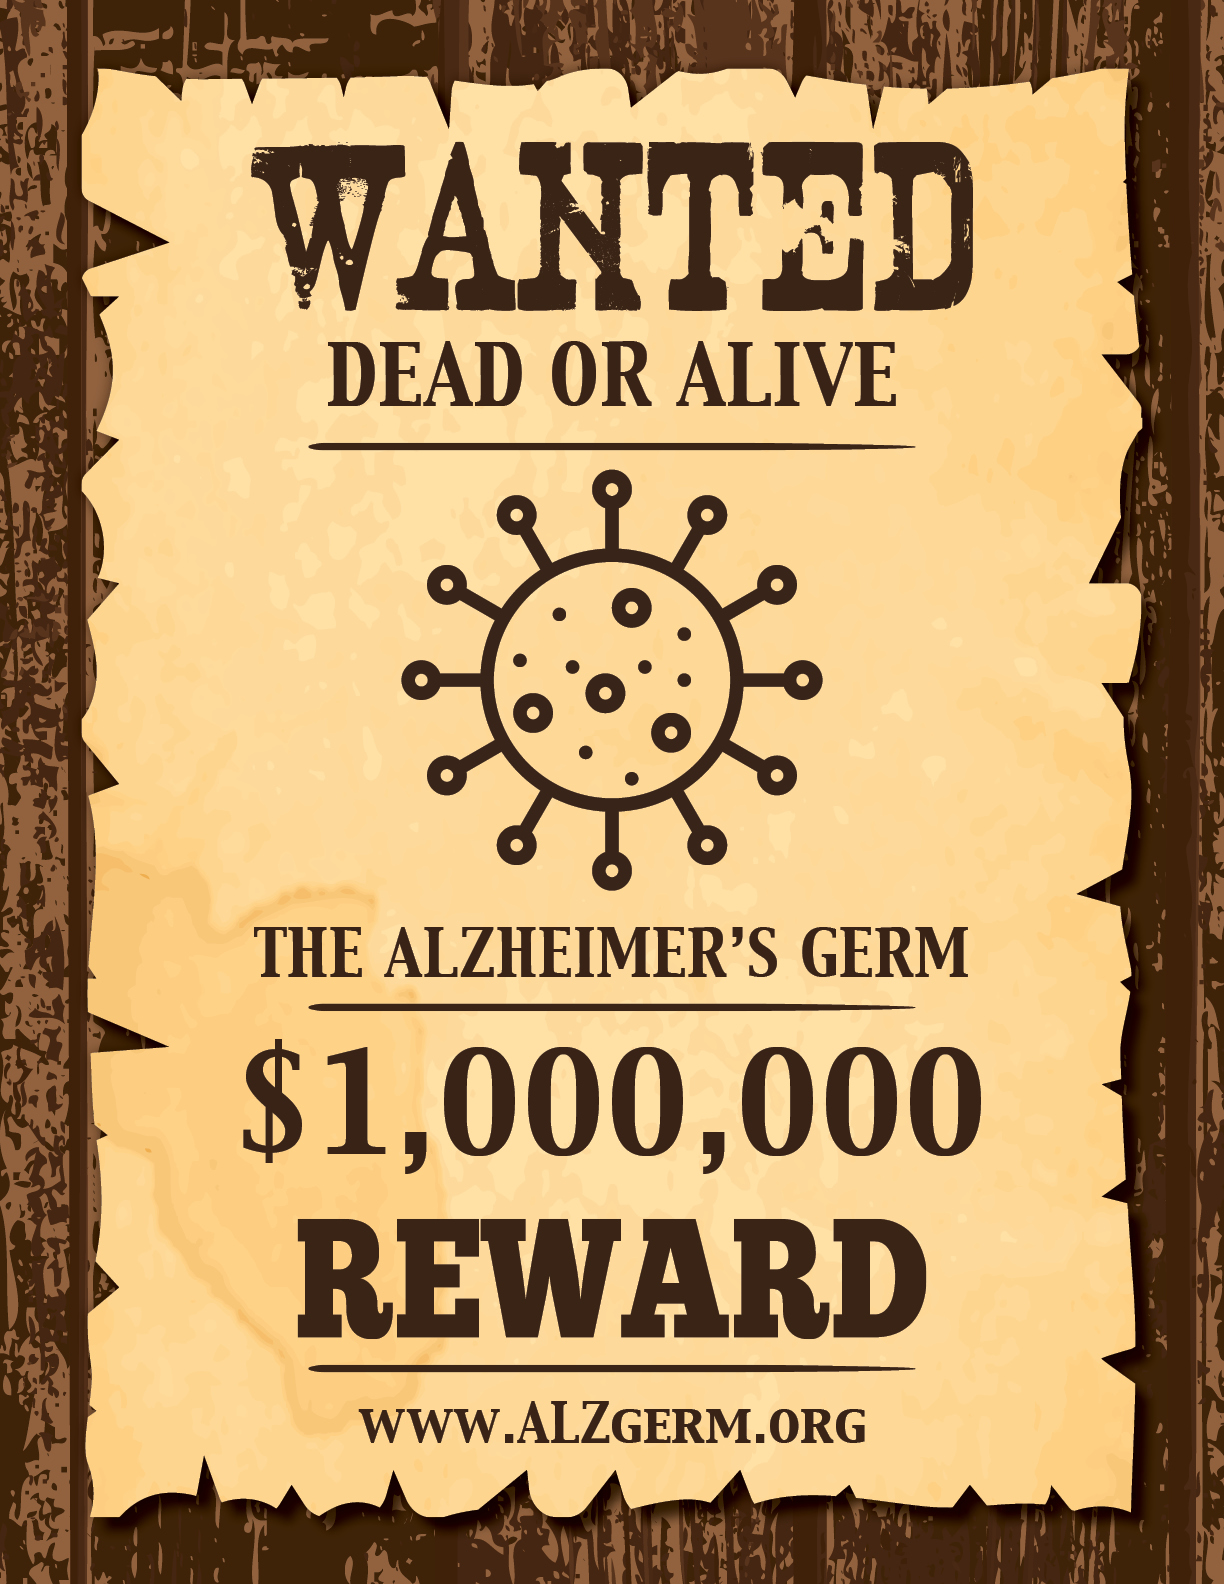 “Wanted” Poster Seeks Researchers for Alzheimer’s Germ, $1 million ...